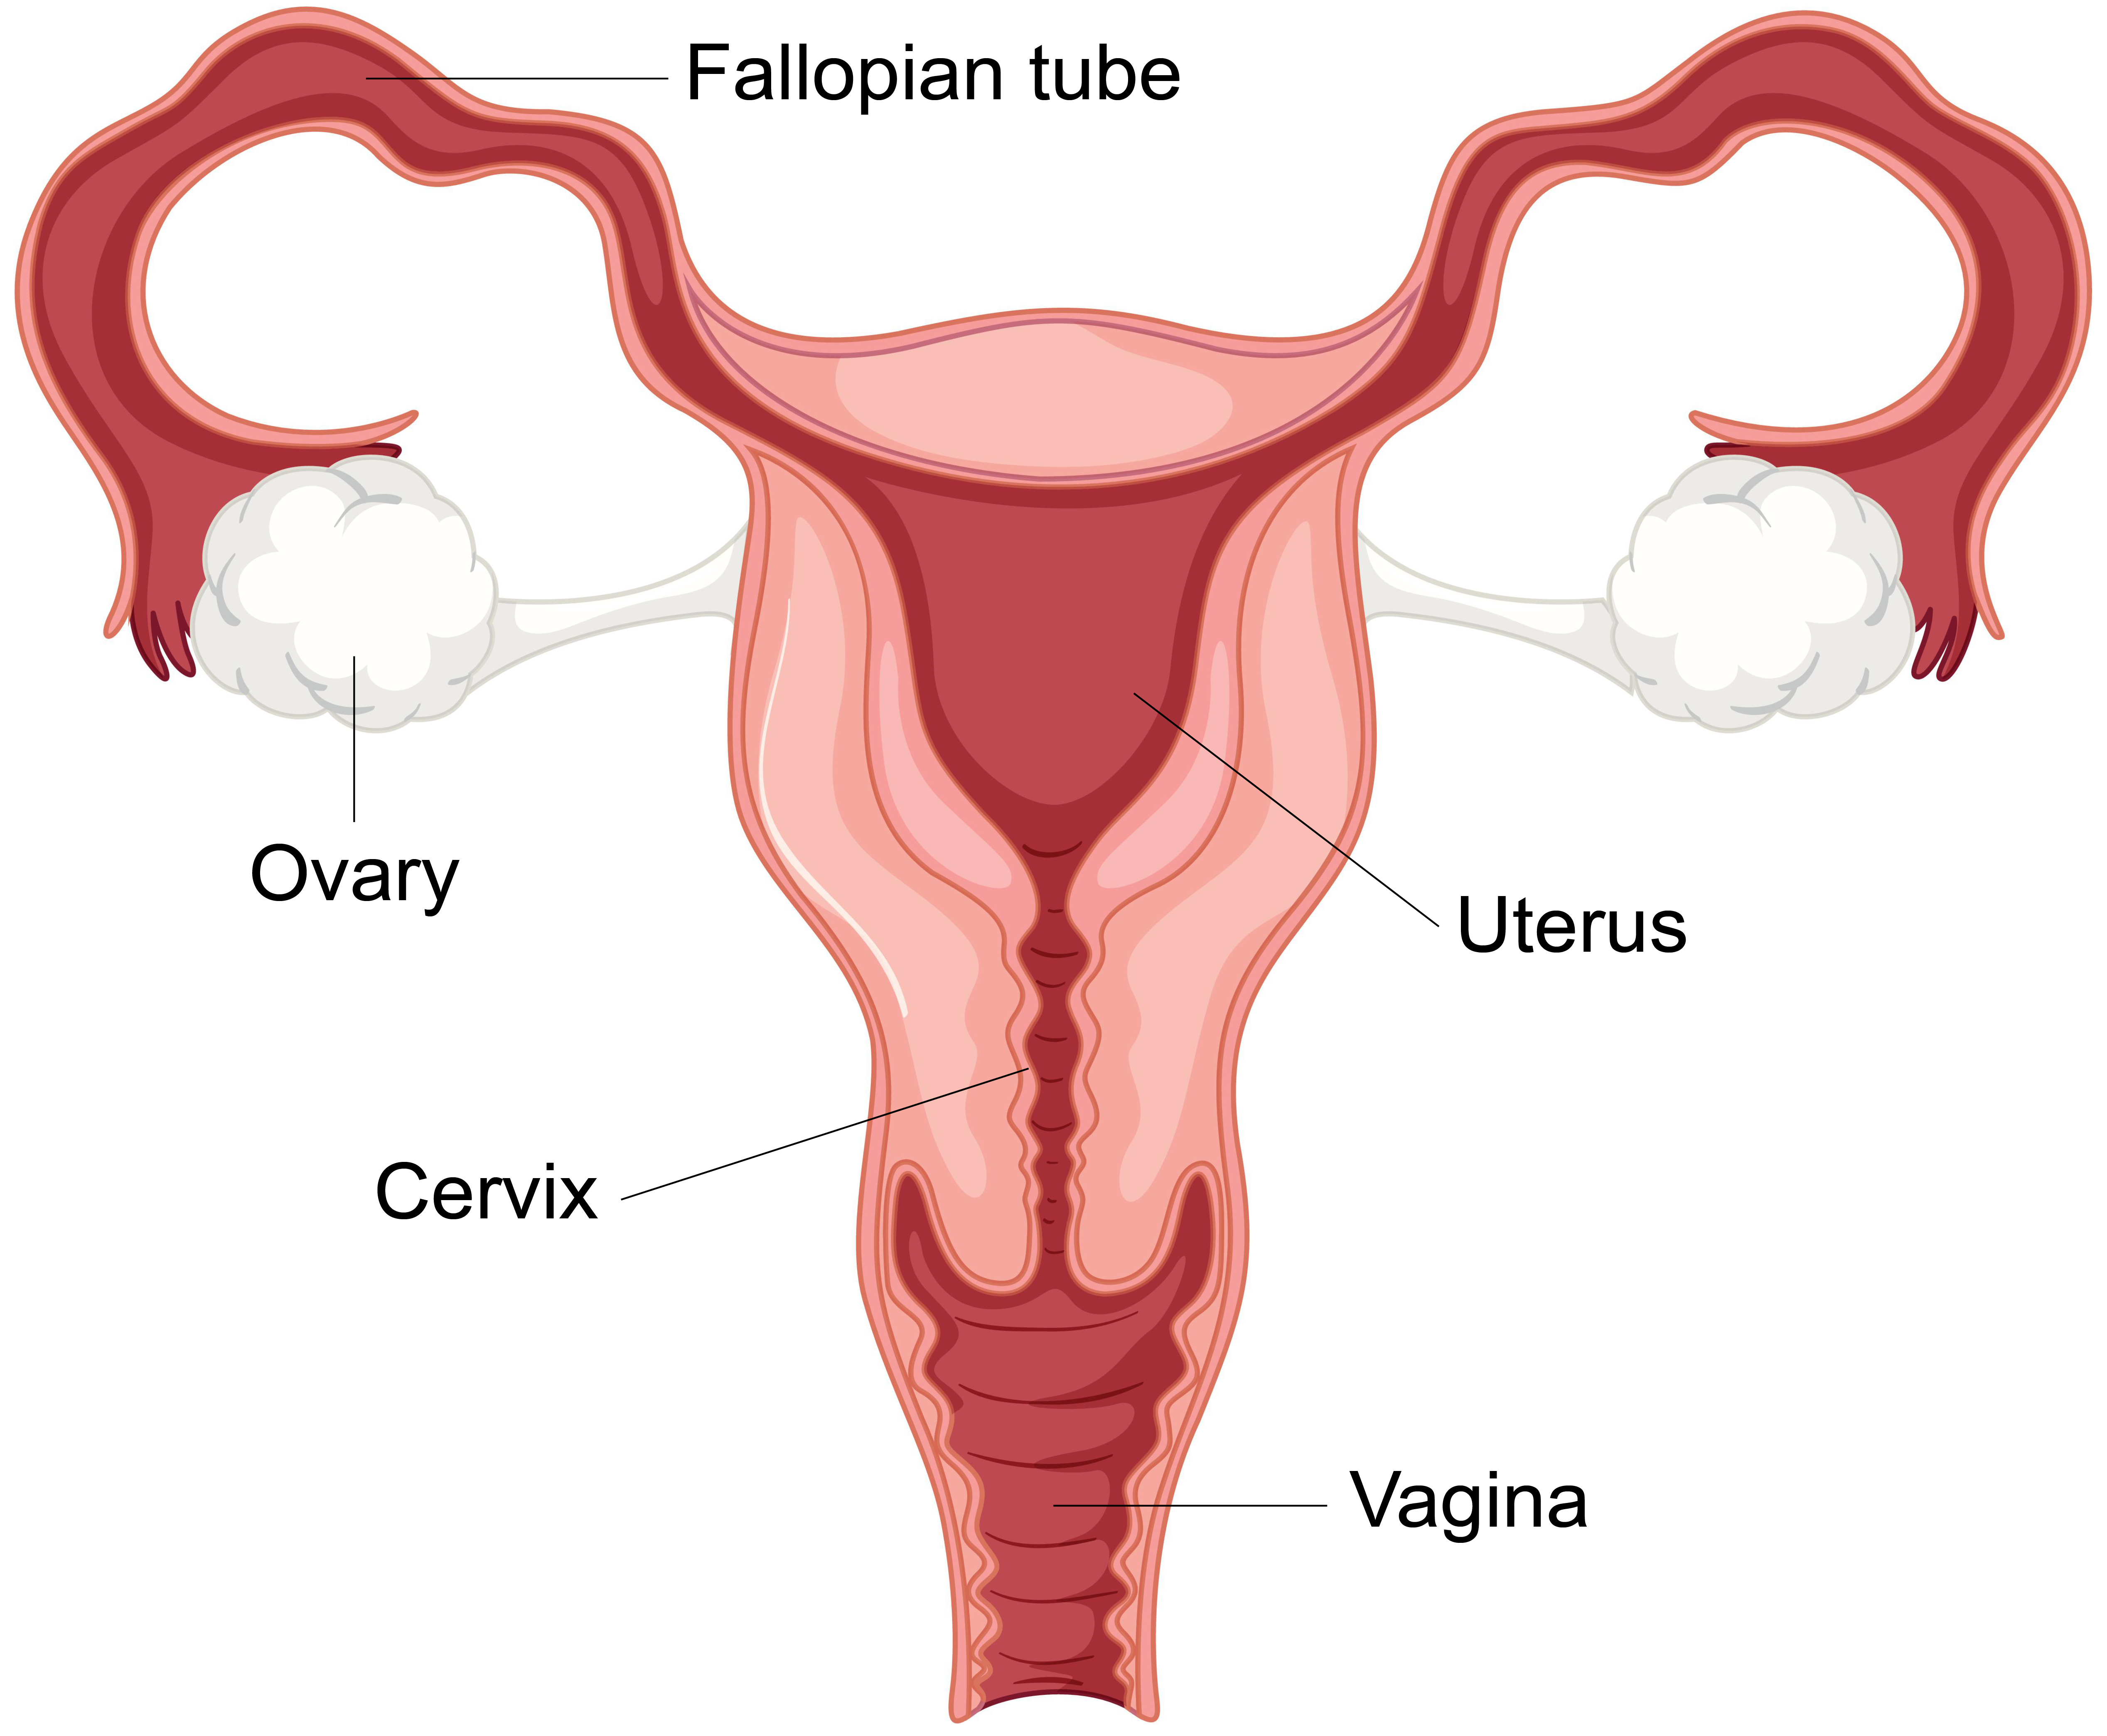 Diagram showing the female reproductive system.